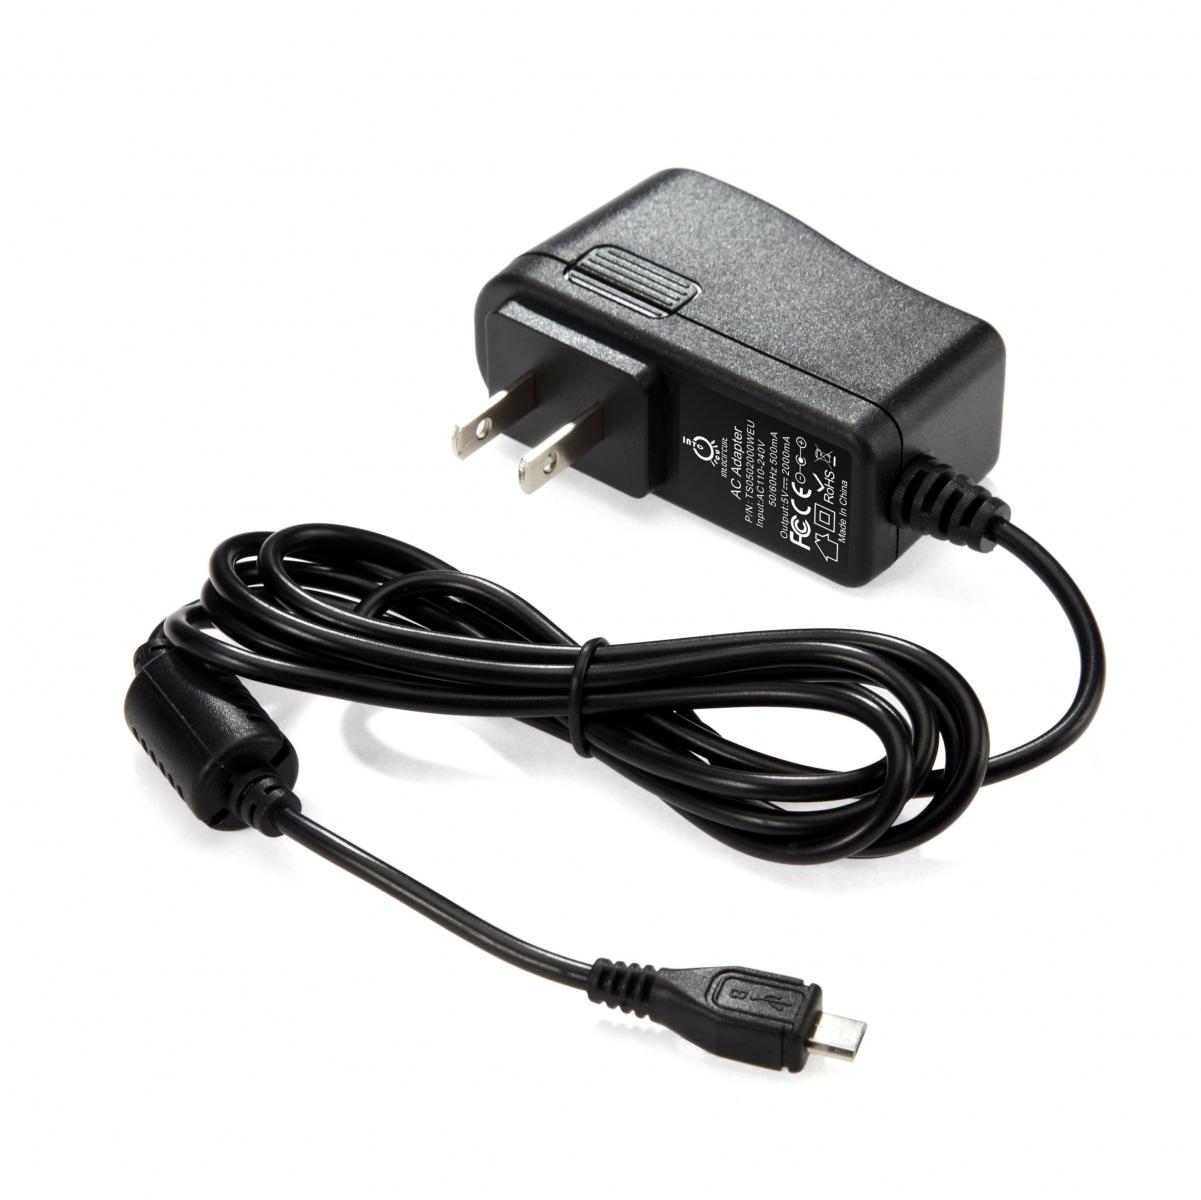 Compatible Designed Charger for Amazon Kindle HD.